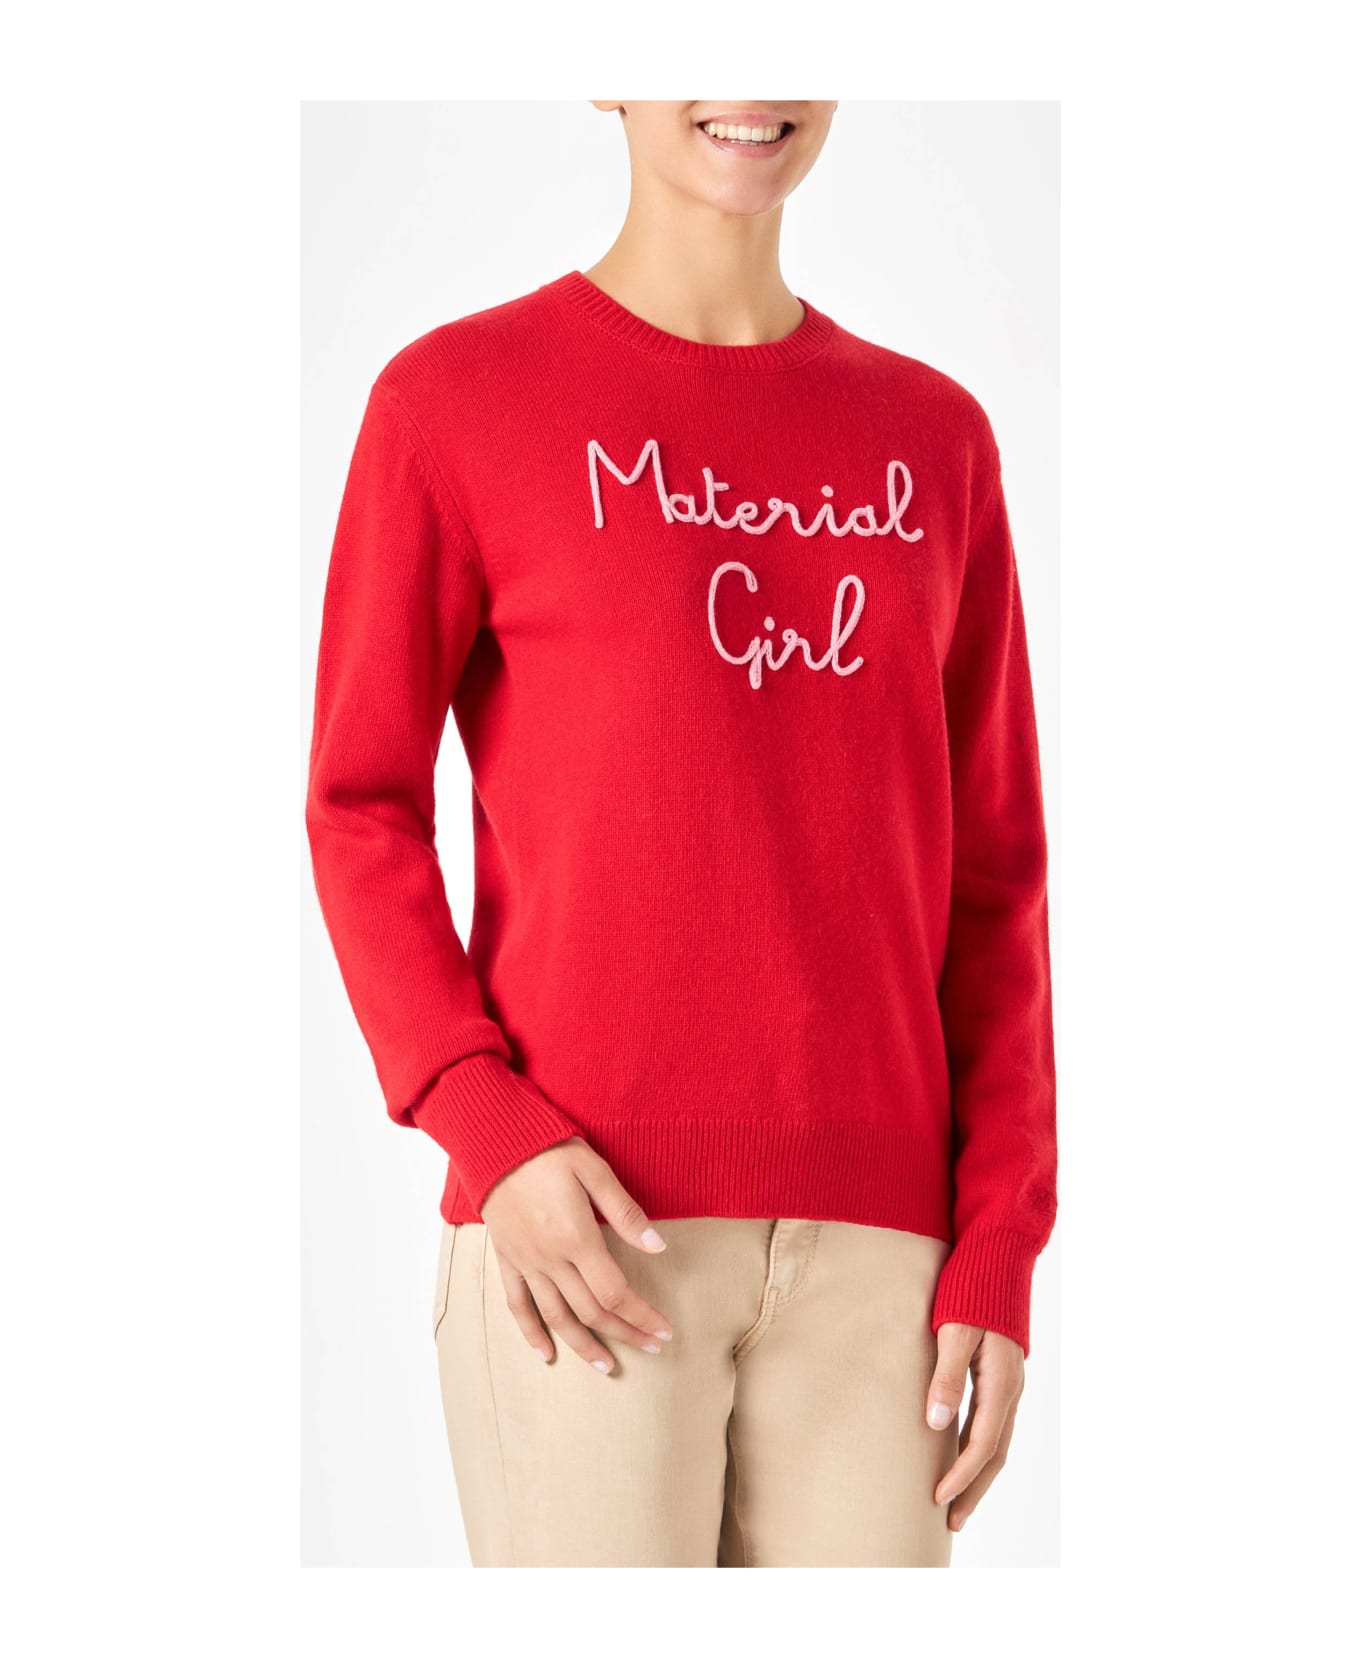 MC2 Saint Barth Woman Sweater With Material Girl Embroidery | Niki Dj Special Edition - RED ニットウェア